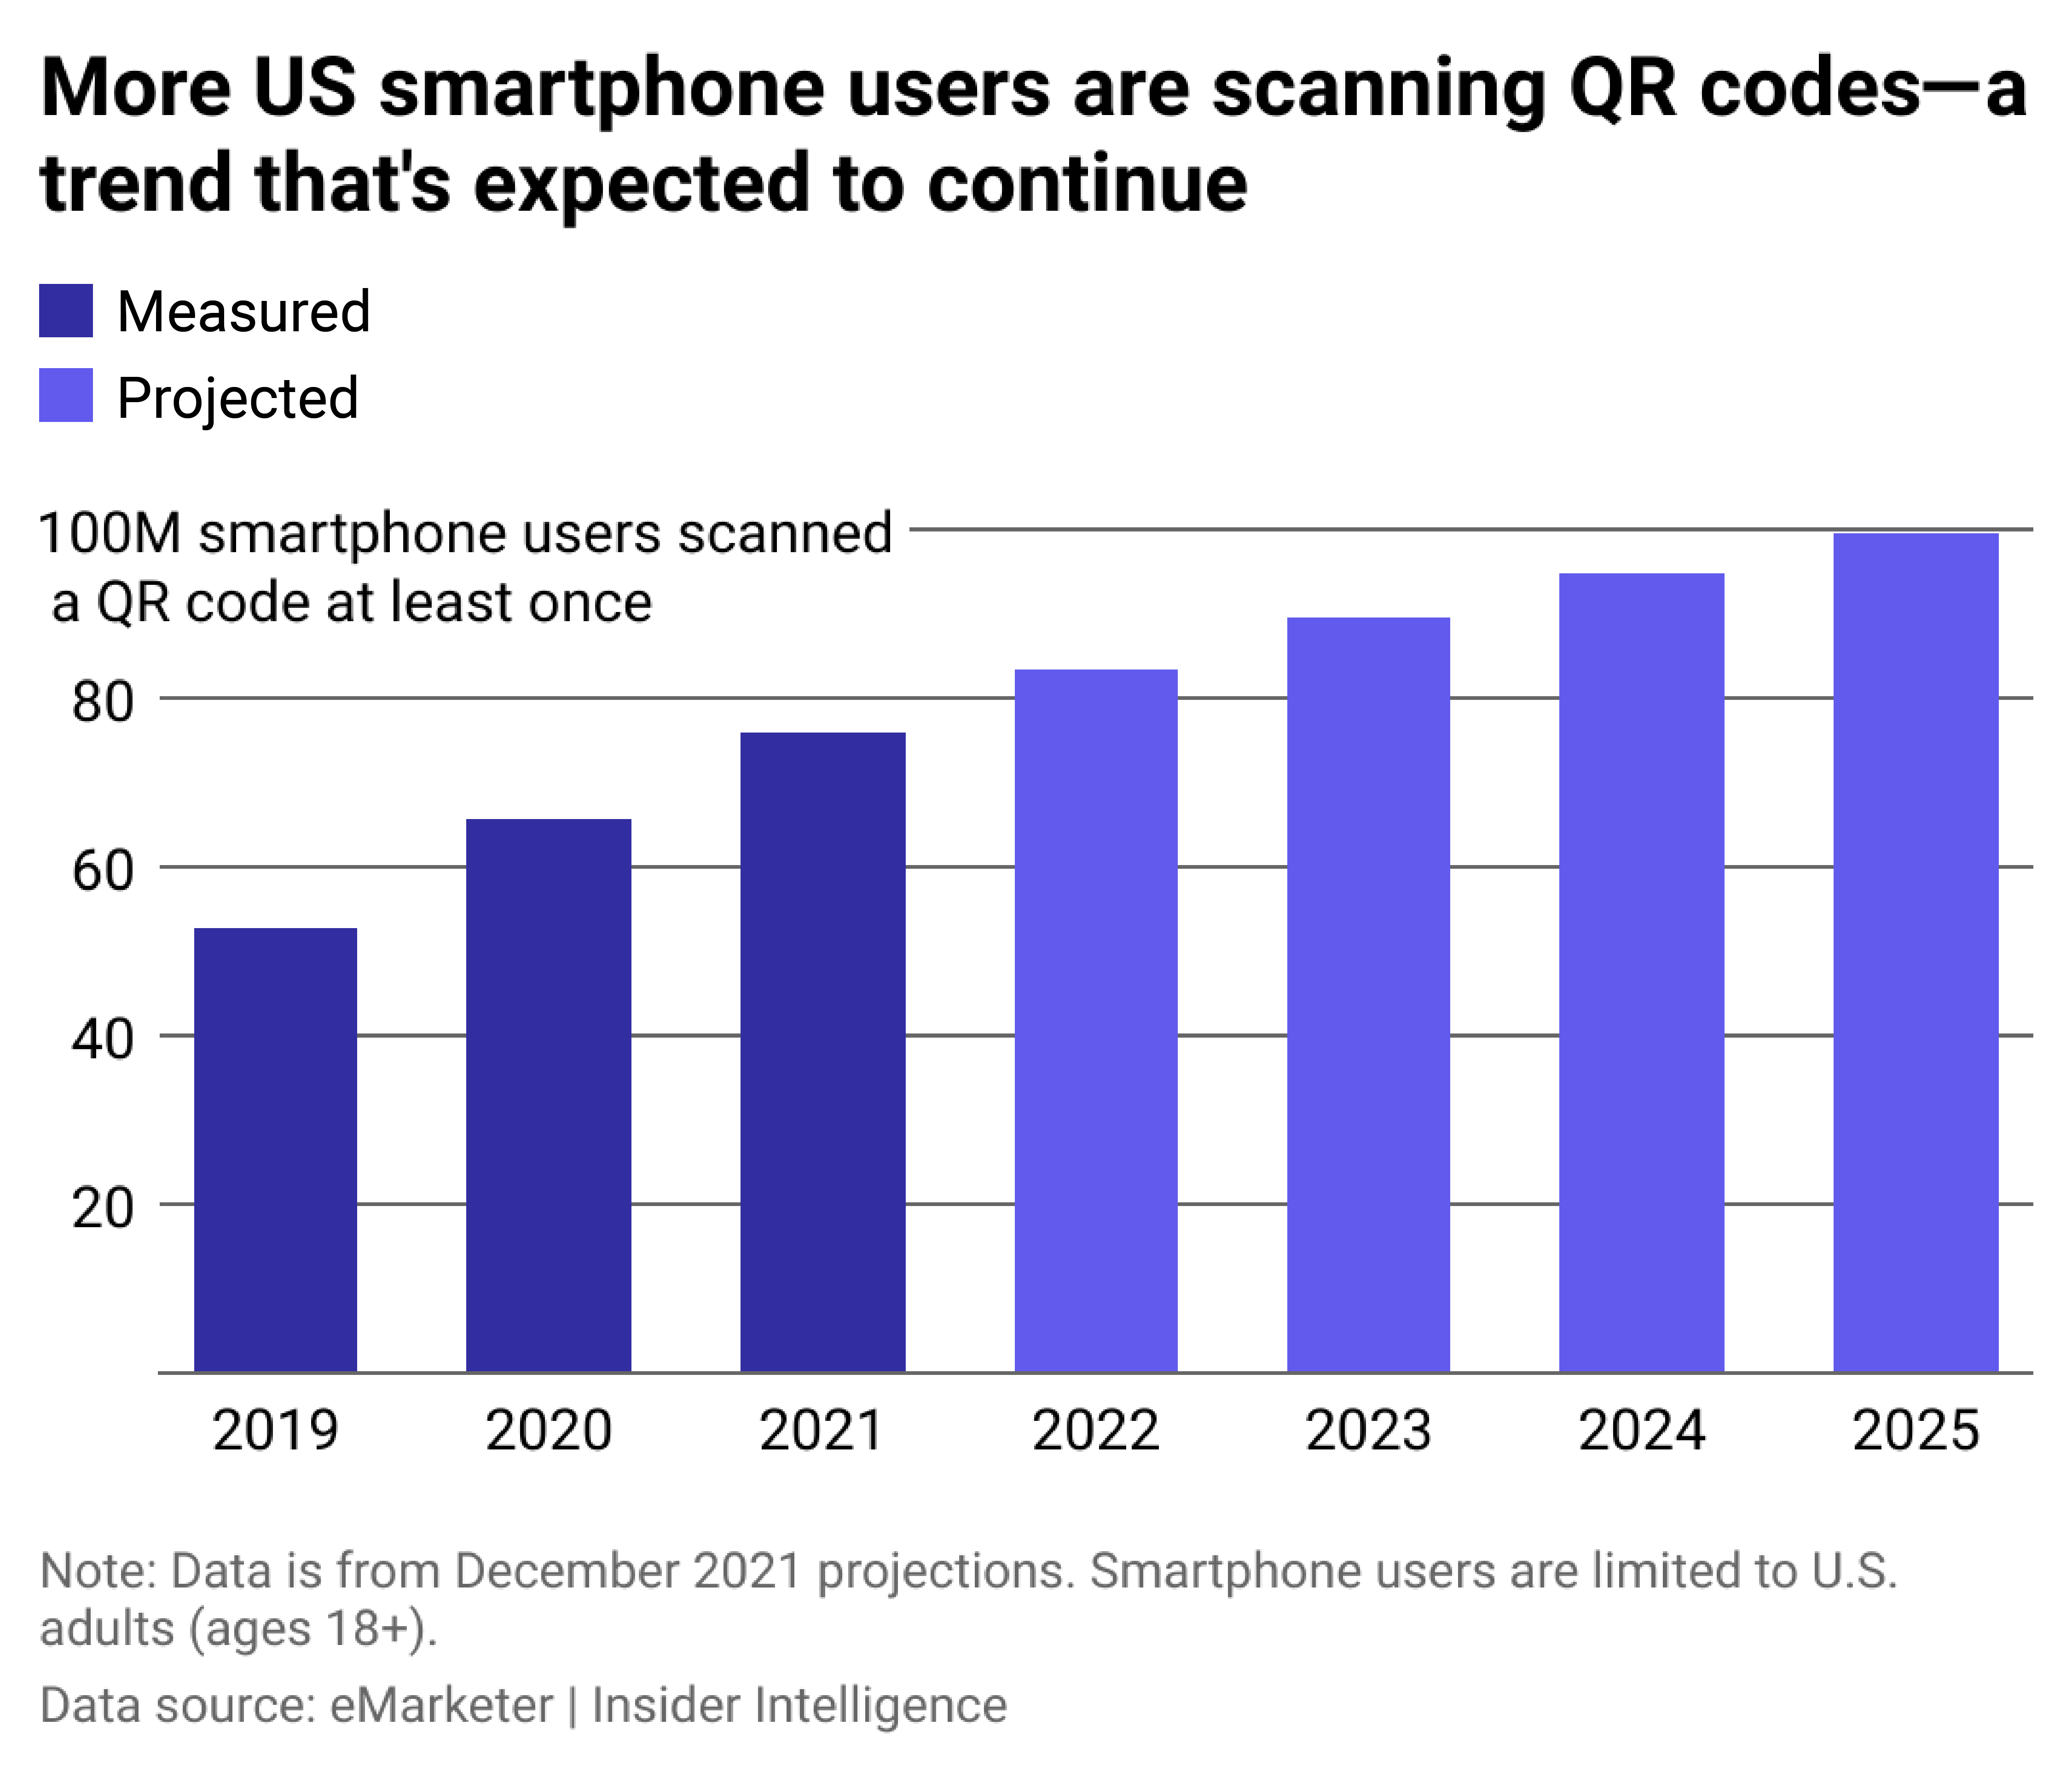 A line chart showing the millions of US smartphone users who scanned at least 1 QR code per year.